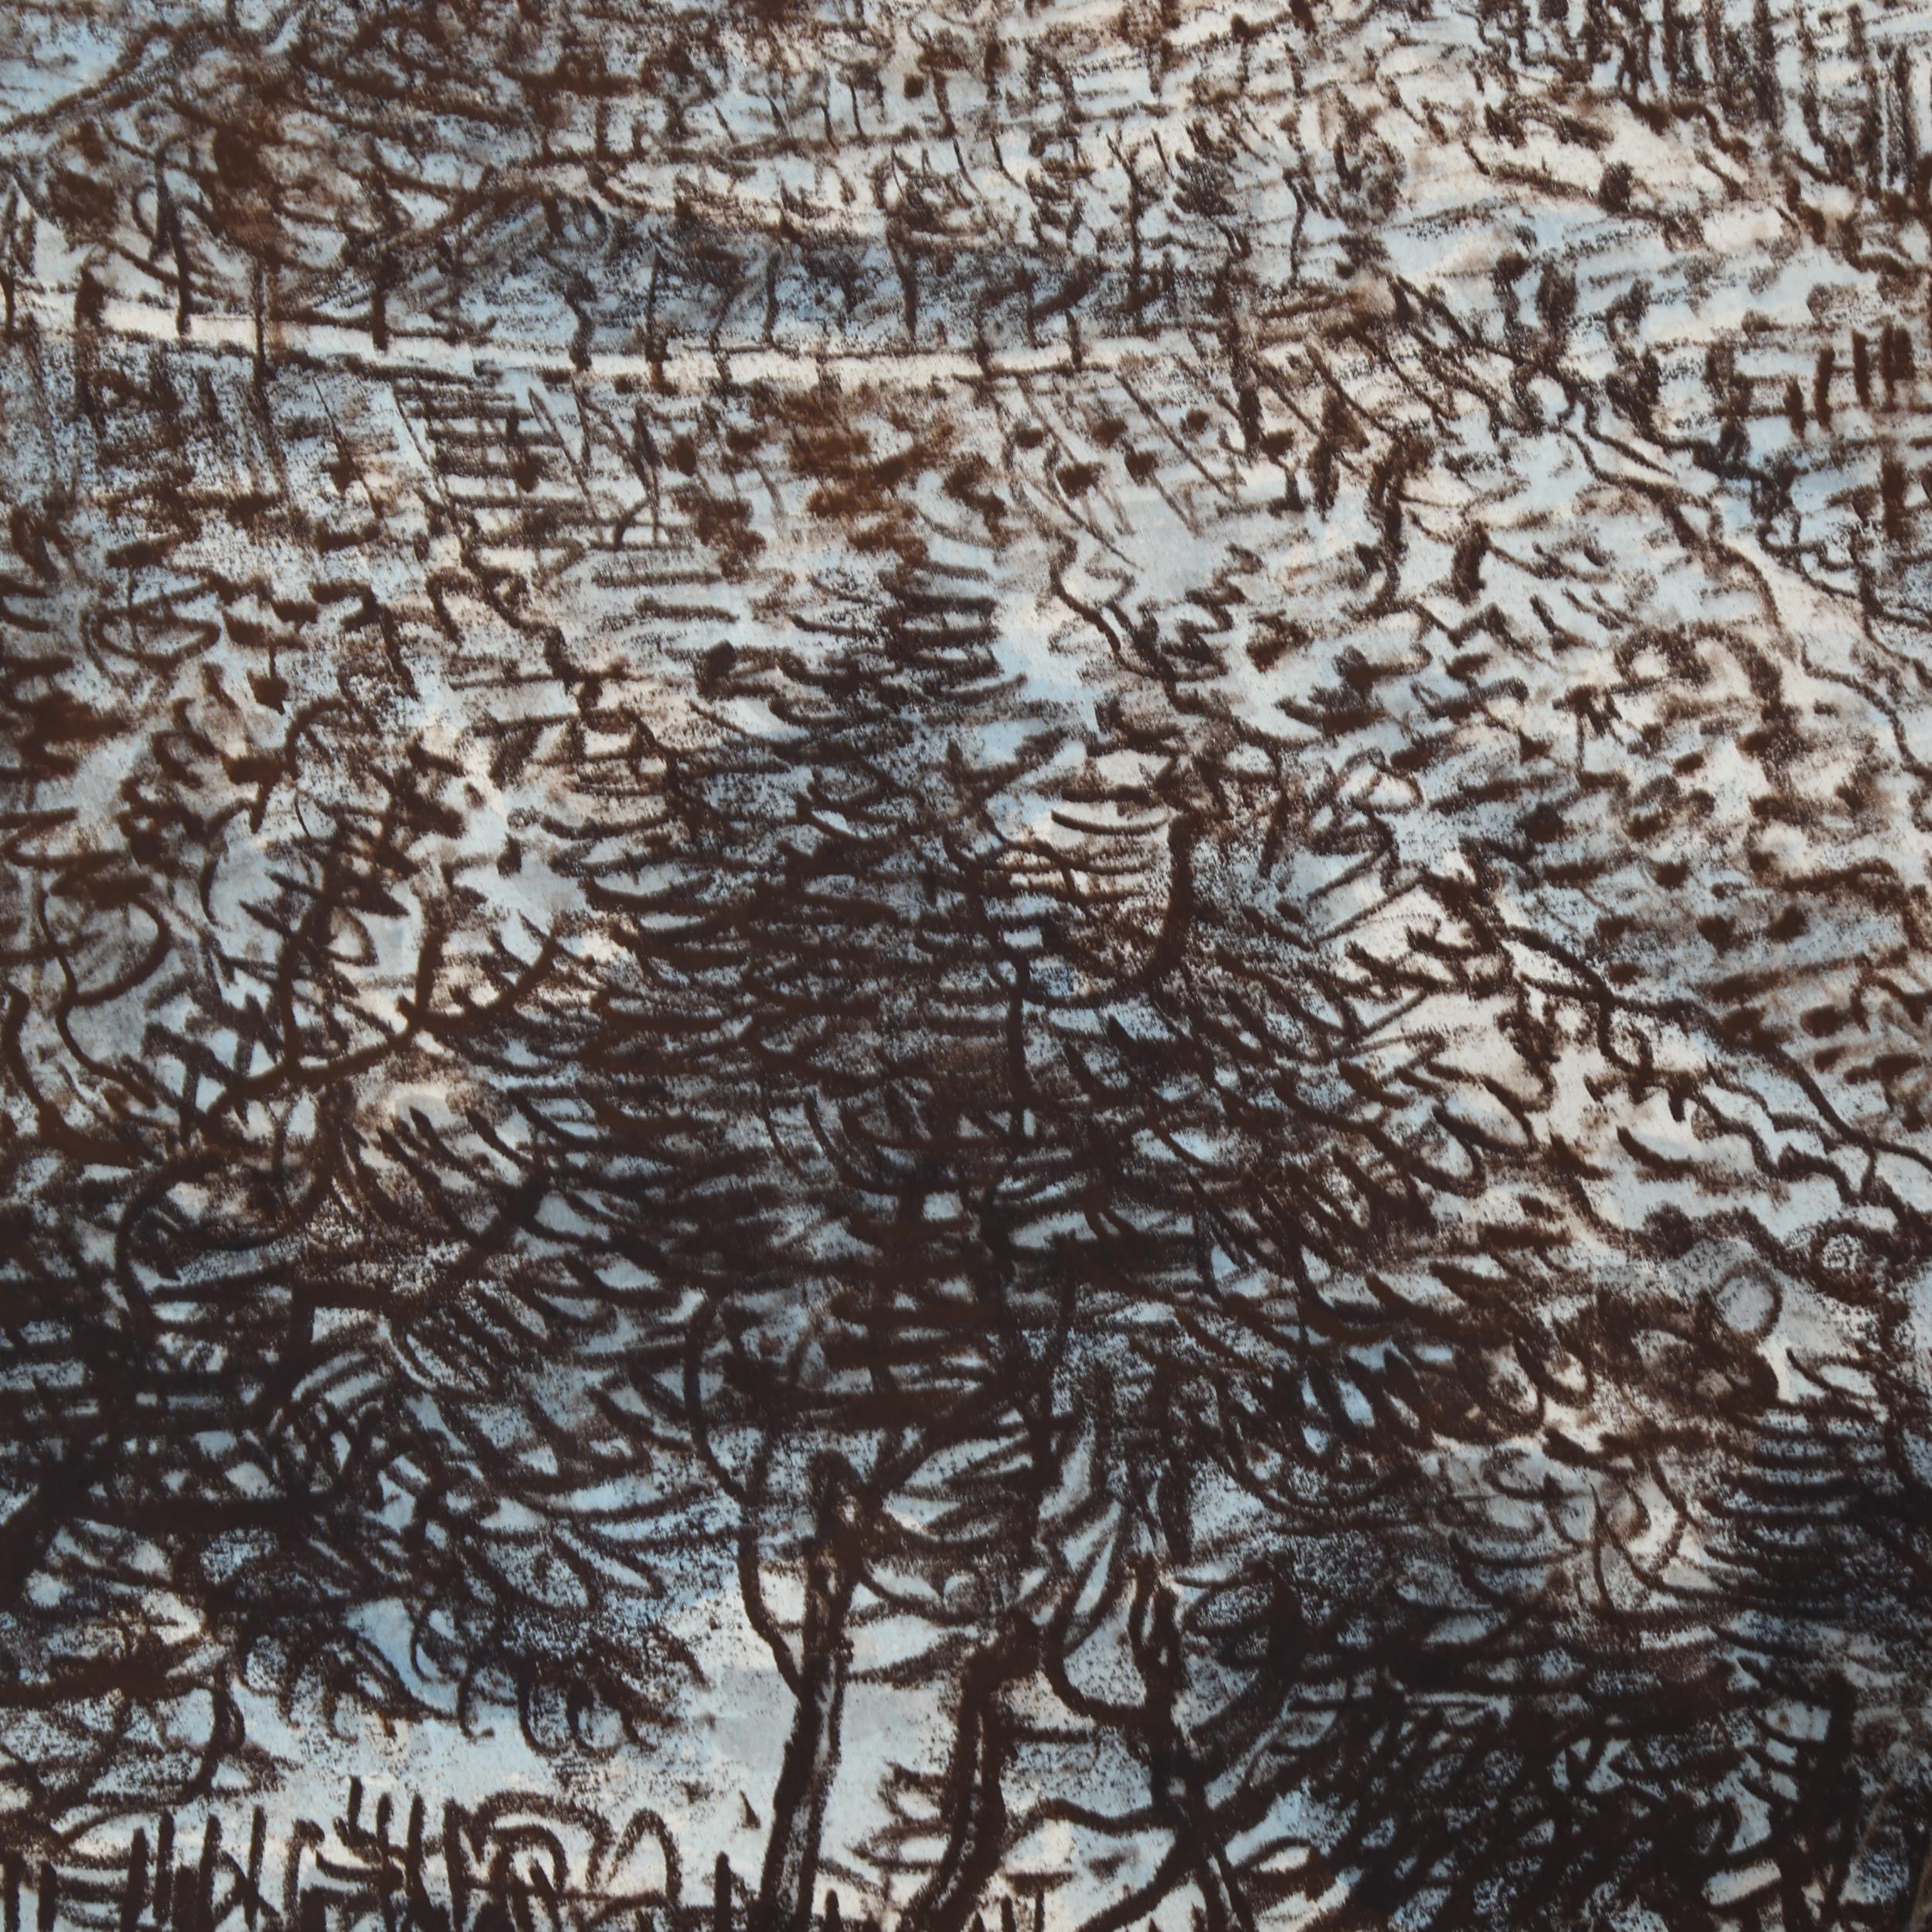 Gerald Ososki, Tuscany landscape, crayon/pastel on card, exhibited at the RBA 1960, signed, 47cm x - Image 4 of 4